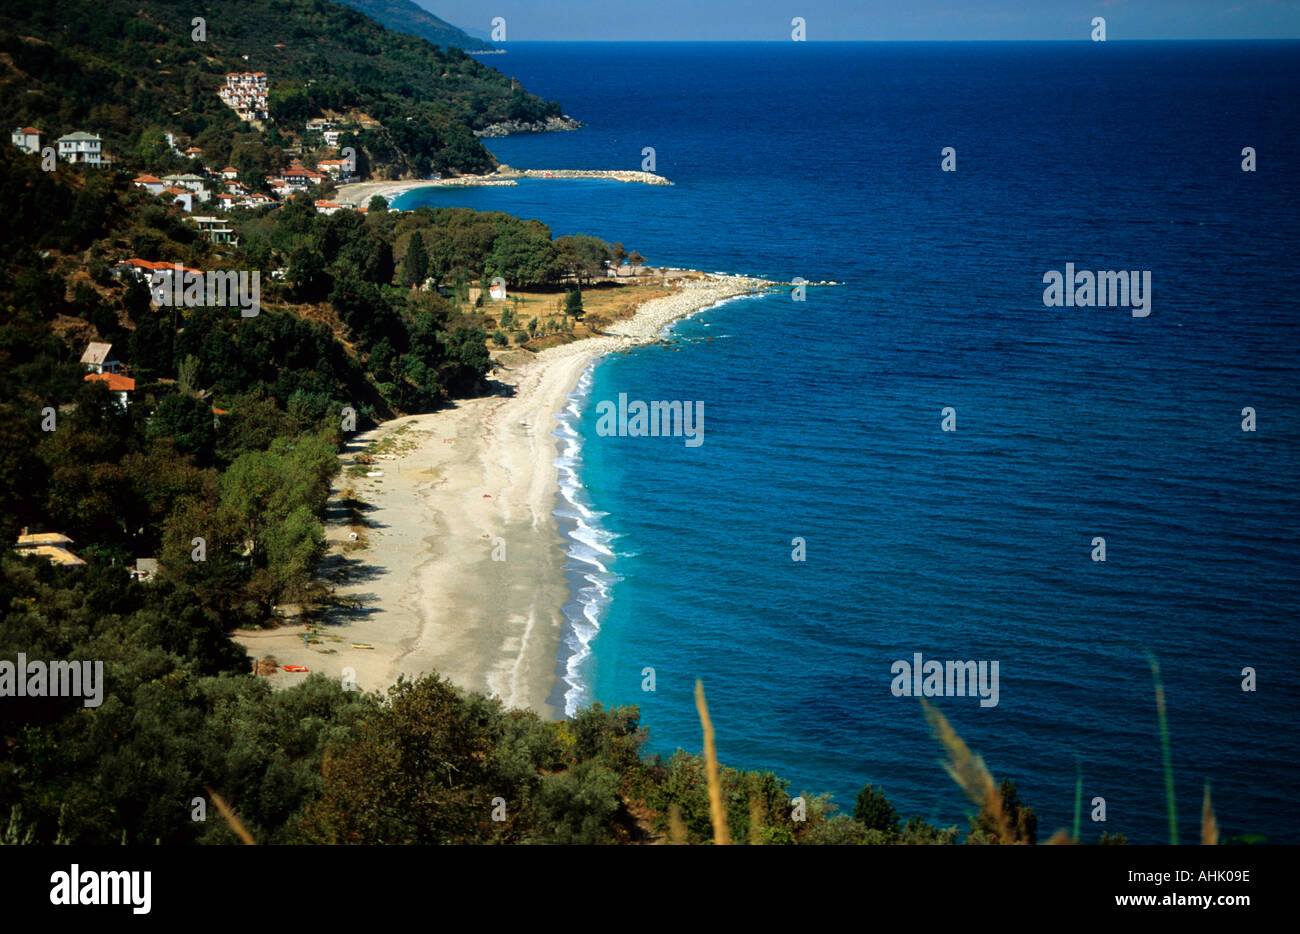 central greece thessaly pelion pilion a view of agios ioannis beach and  damouchari bay in distance Stock Photo - Alamy